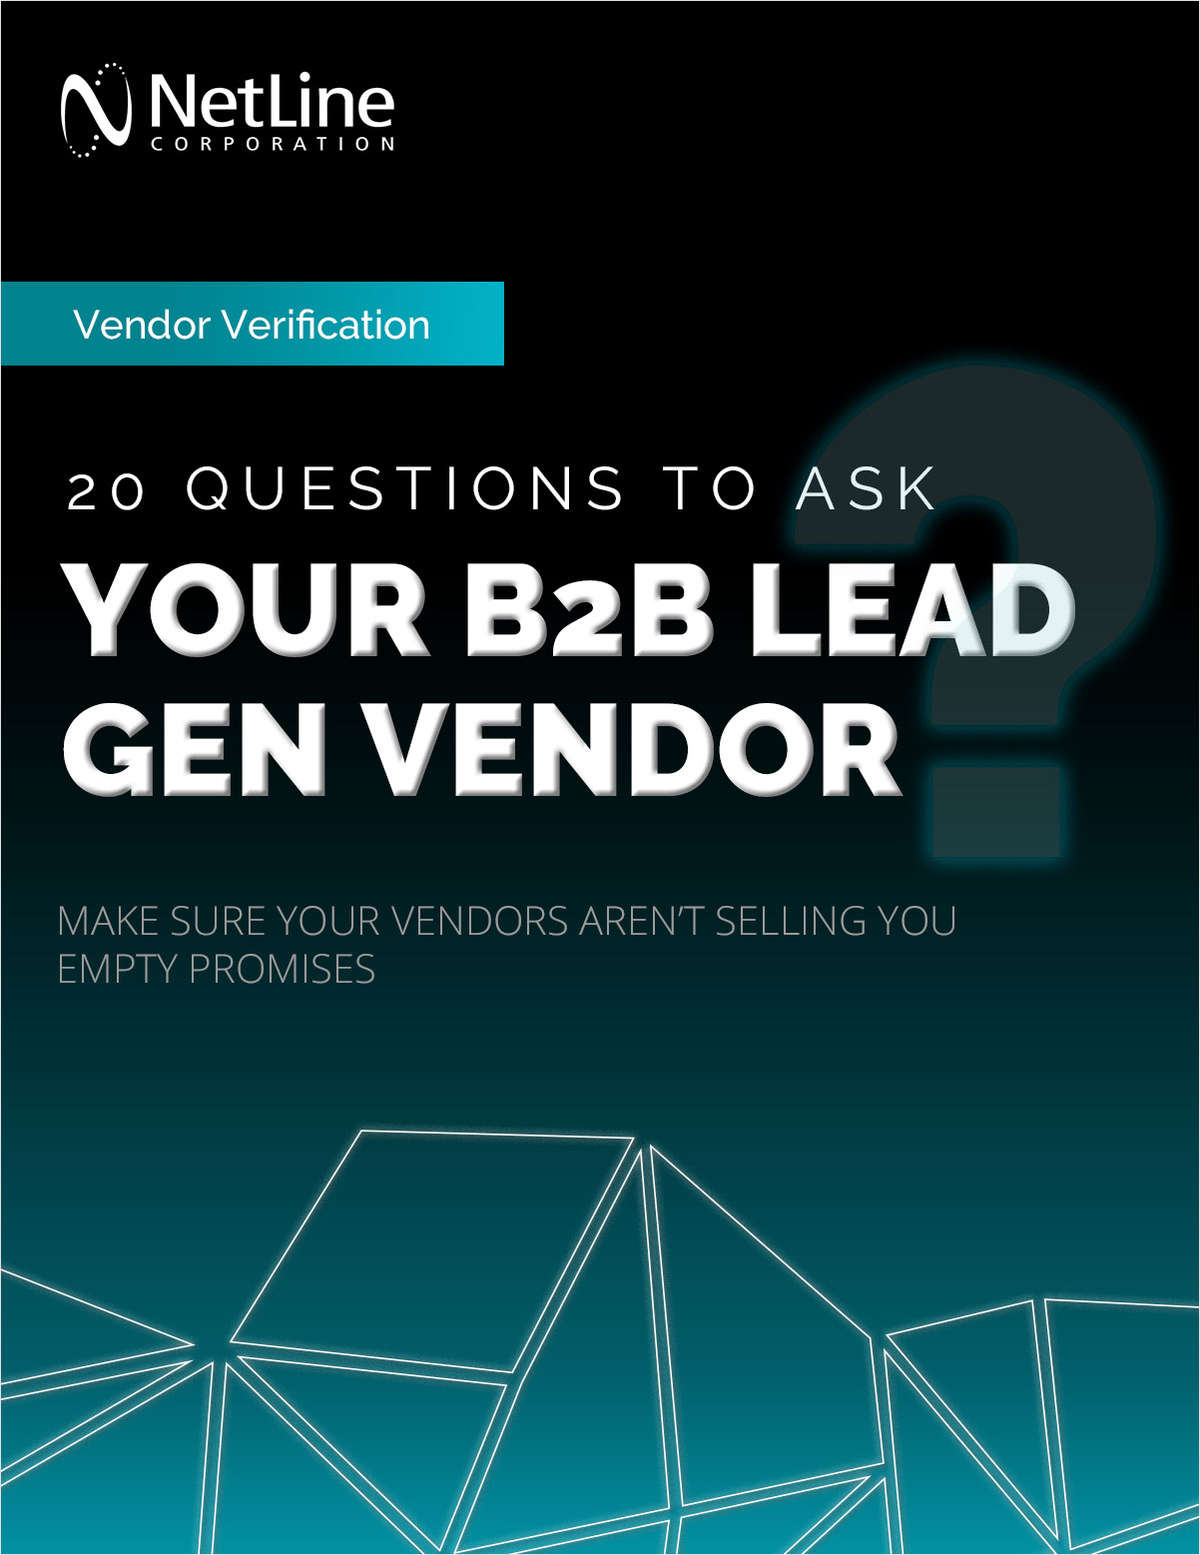 20 Questions to Ask Your B2B Lead Gen Vendor